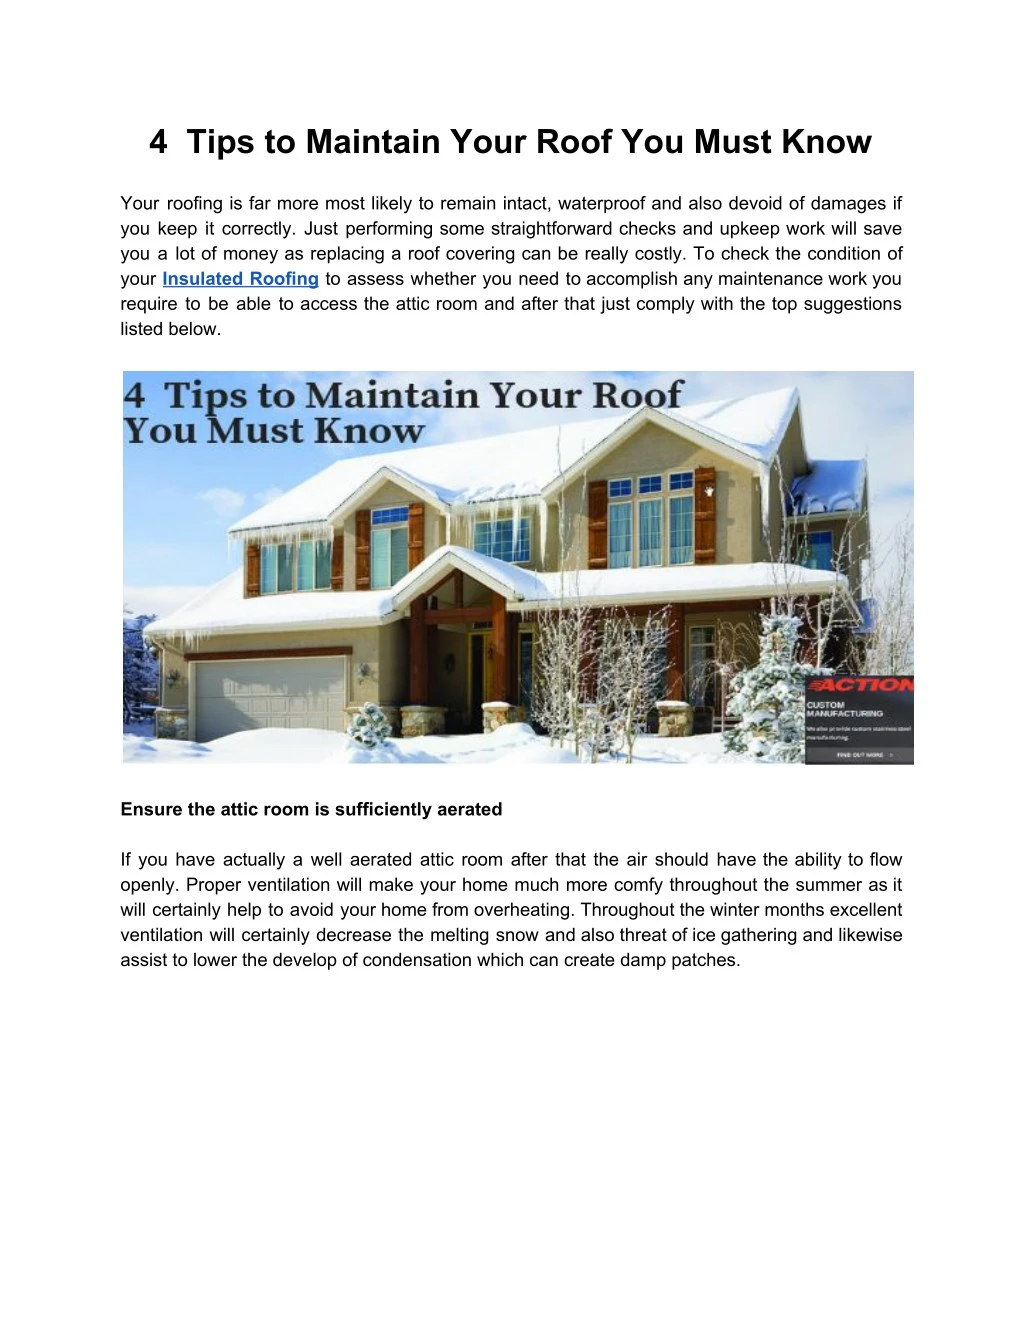 4 tips to maintain your roof you must know